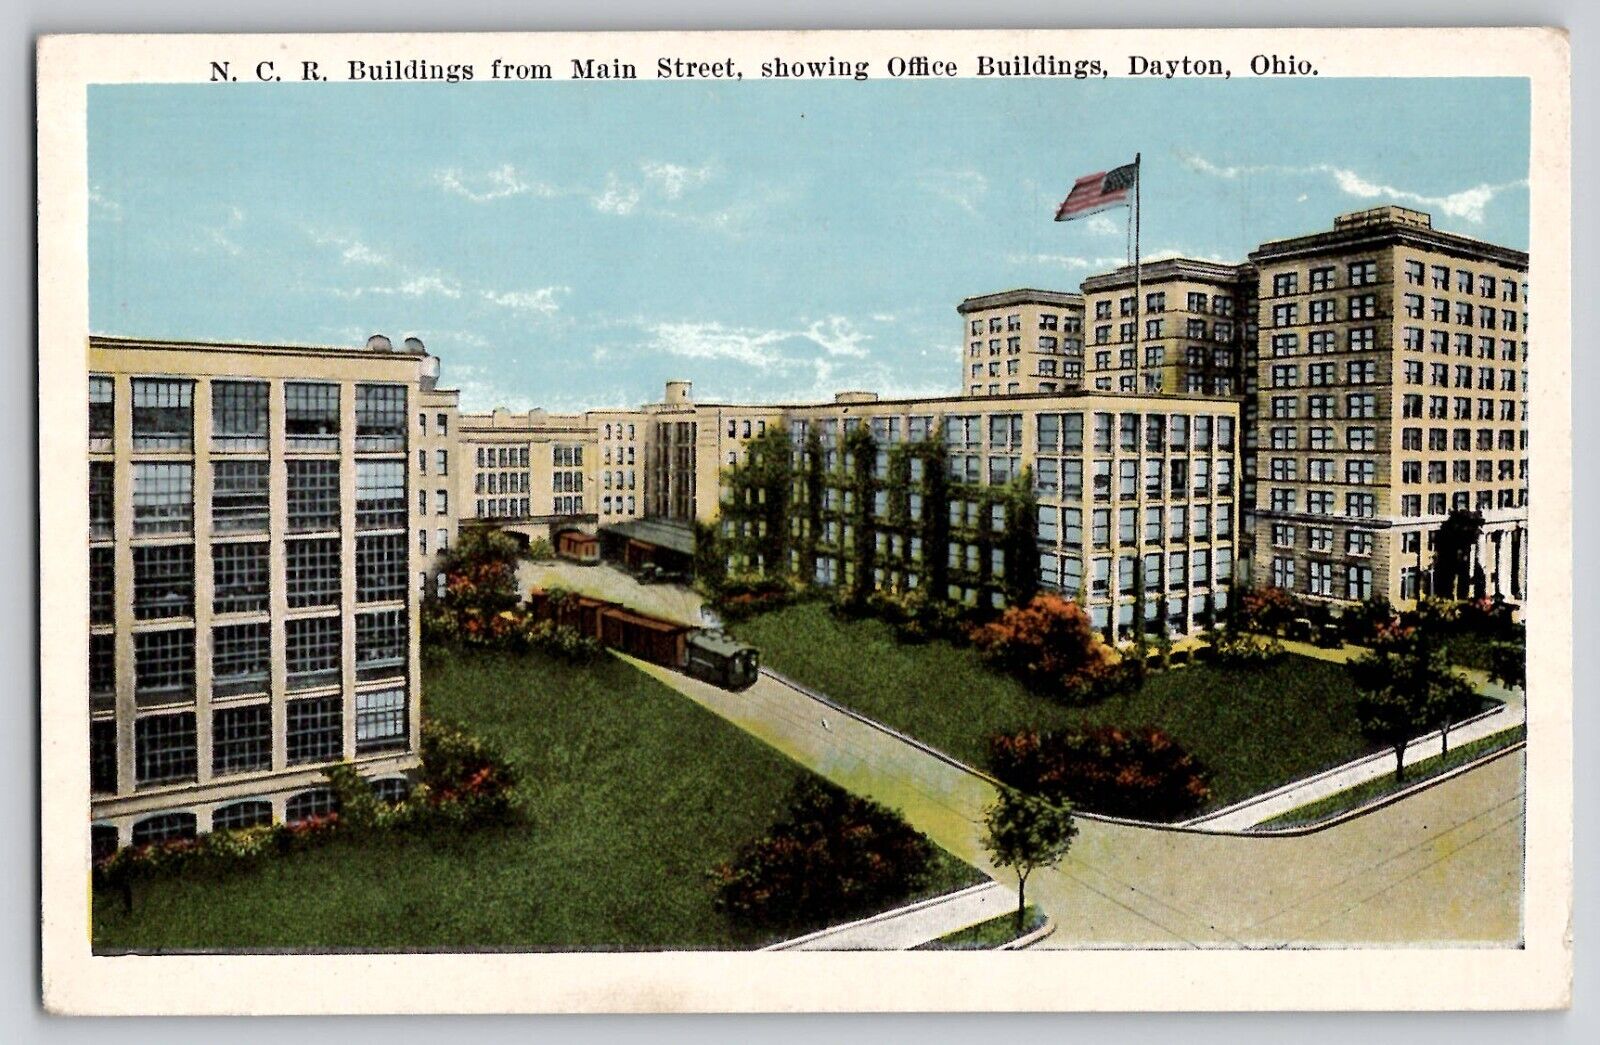 NCR Buildings Offices Main Street View Trolly Dayton OH Ohio Postcard 1915-20s